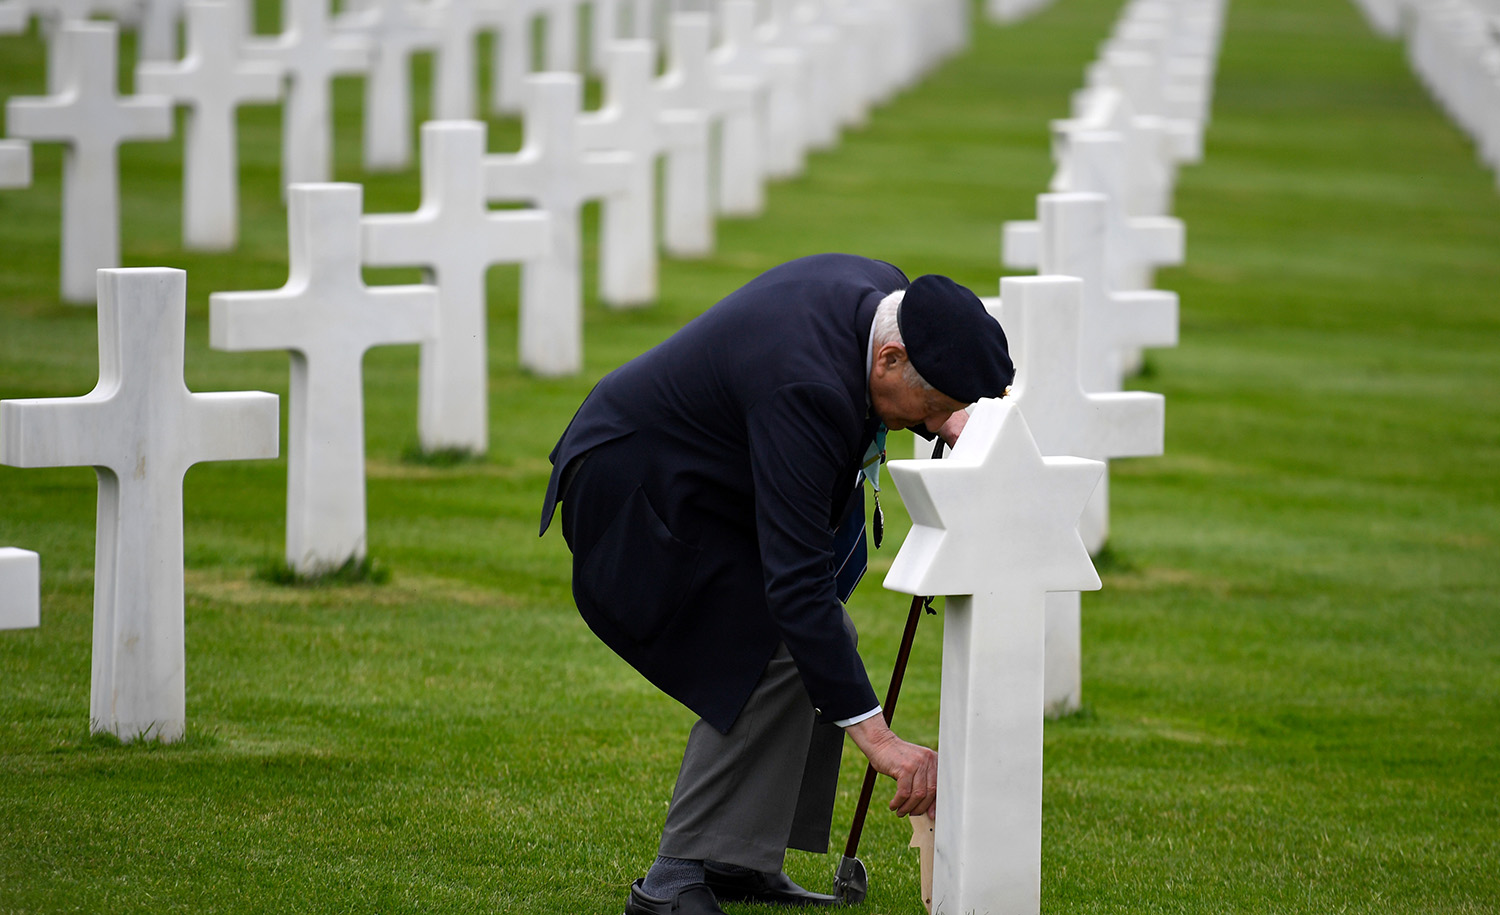 WWII veteran Mervyn Kresh places a poppy on an inscribed wooden star of David by a headstone after a remembrance ceremony at the Normandy American Cemetery in Colleville-sur-Mer on June 4, 2019, ahead of the 75th anniversary of D-Day. DAMIEN MEYER/AFP via Getty Images.
